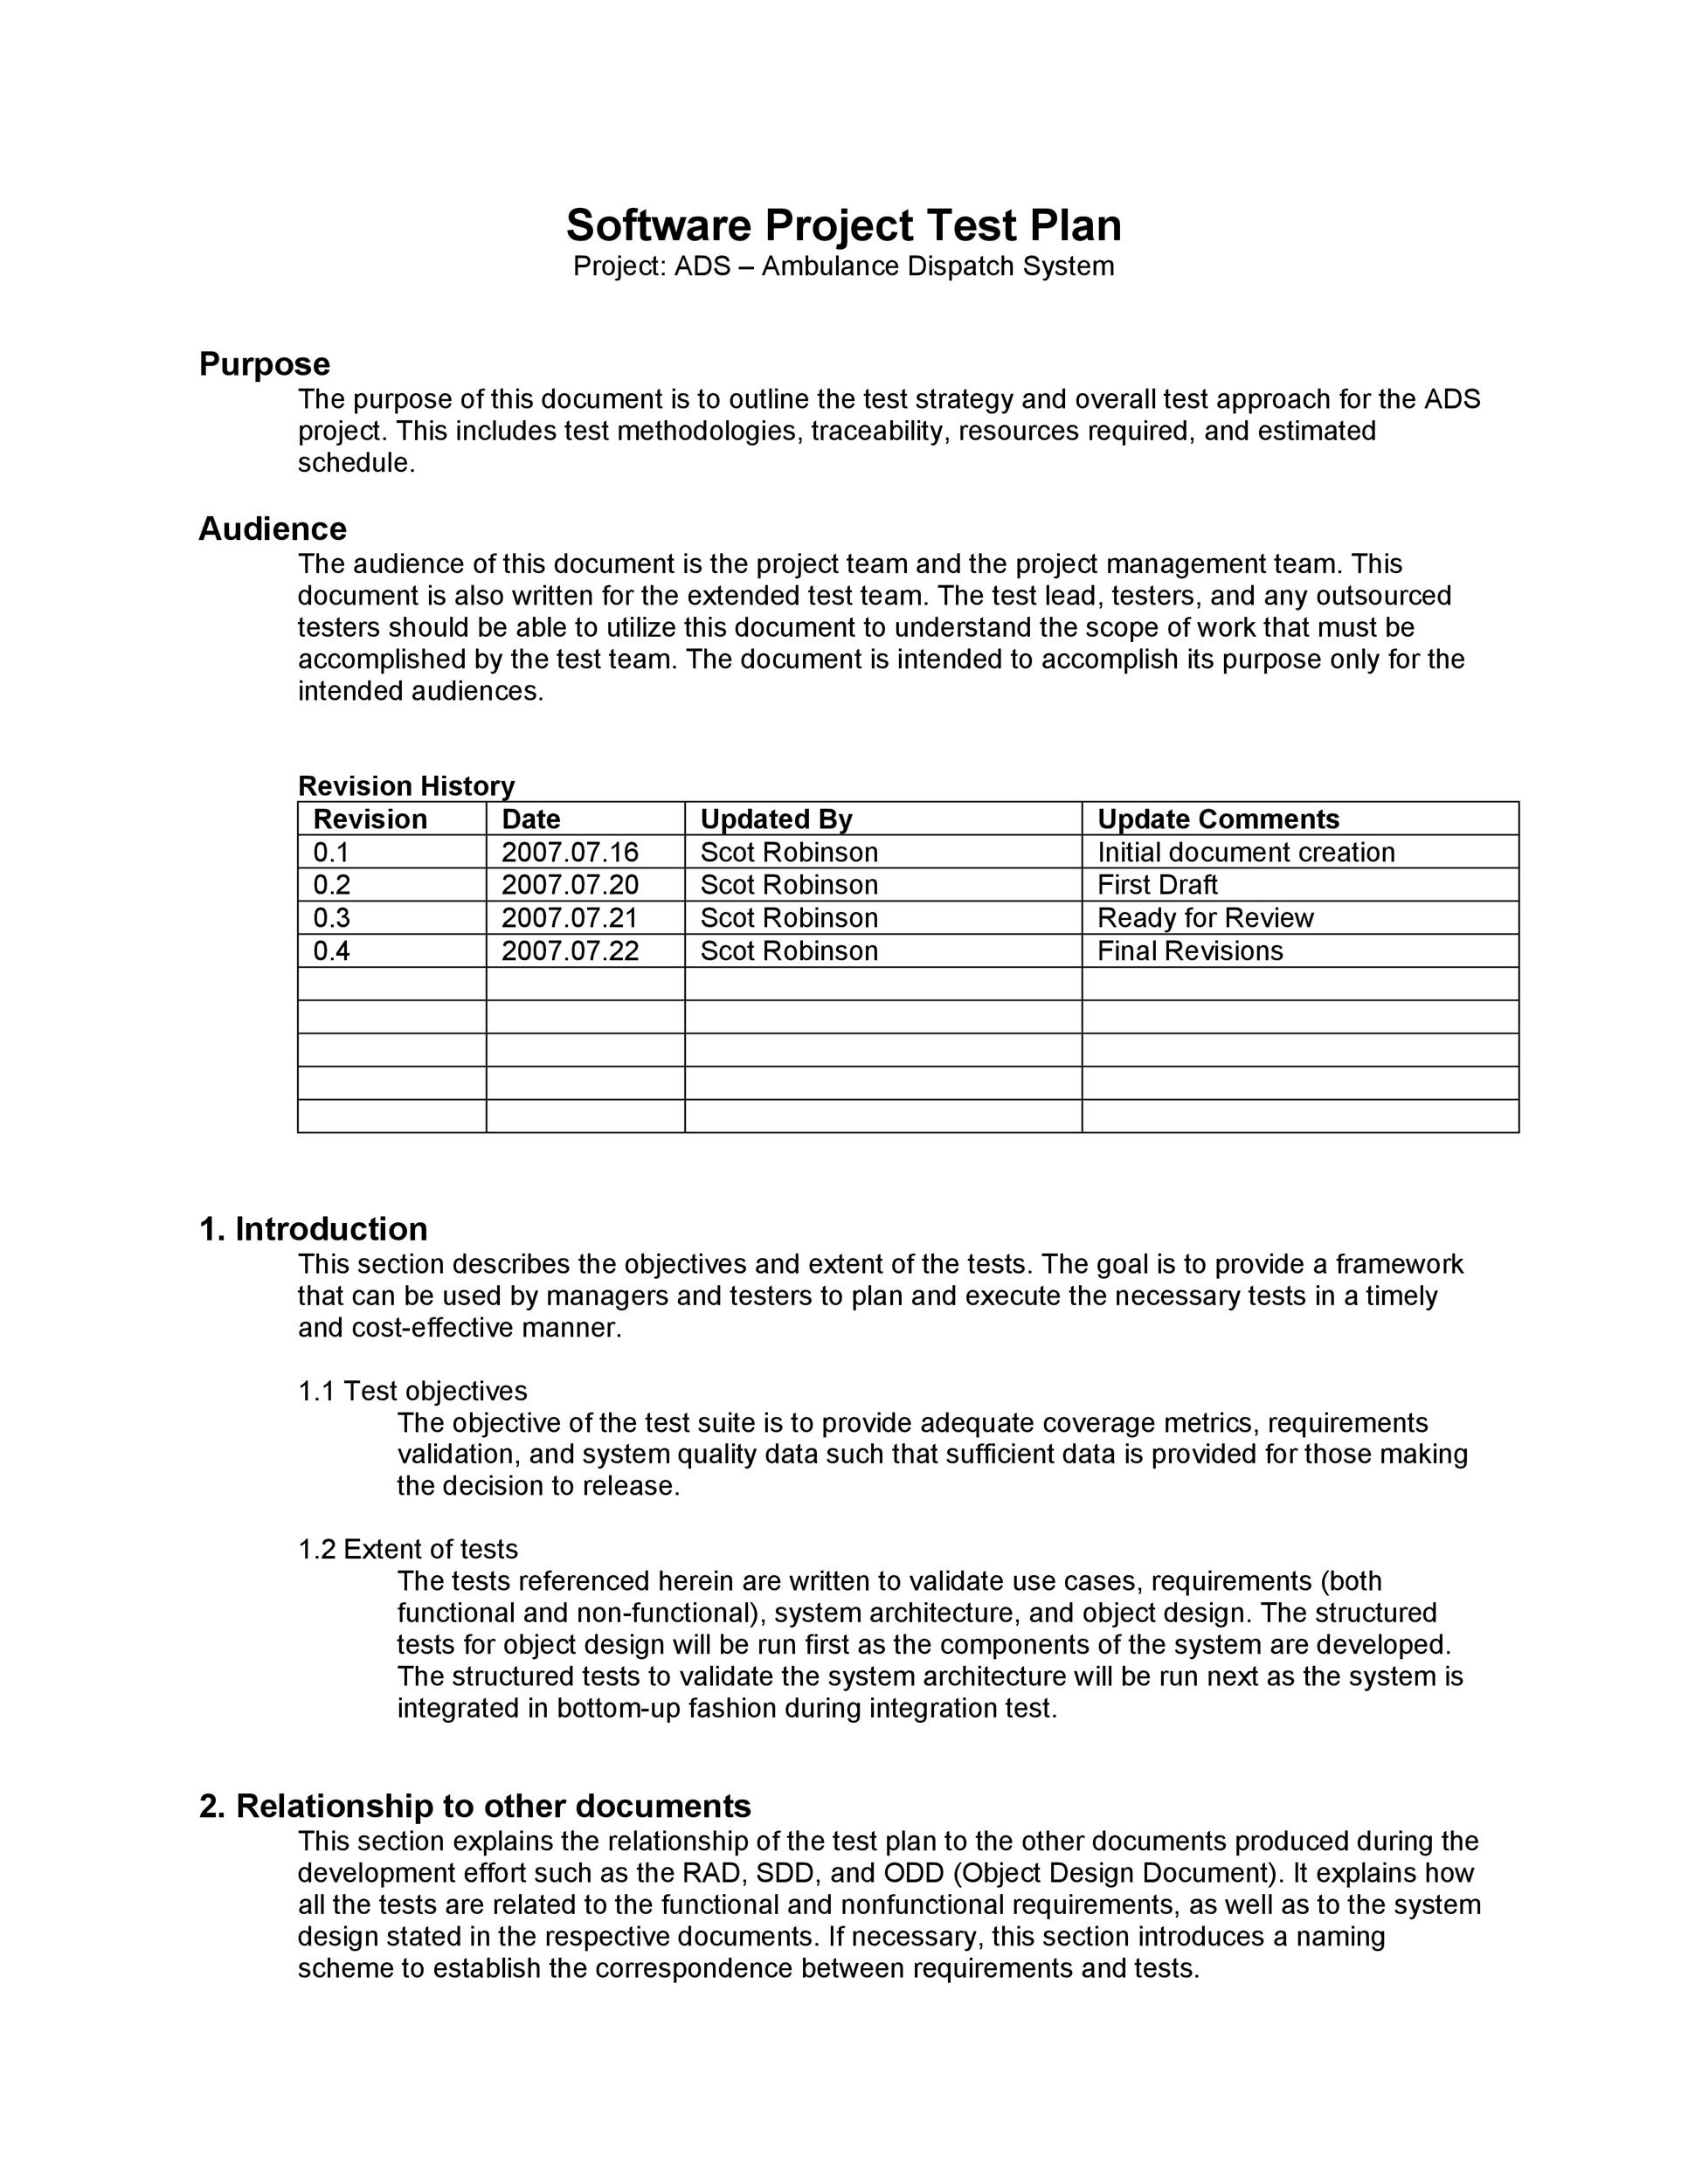 Software Test Plan Template from templatelab.com